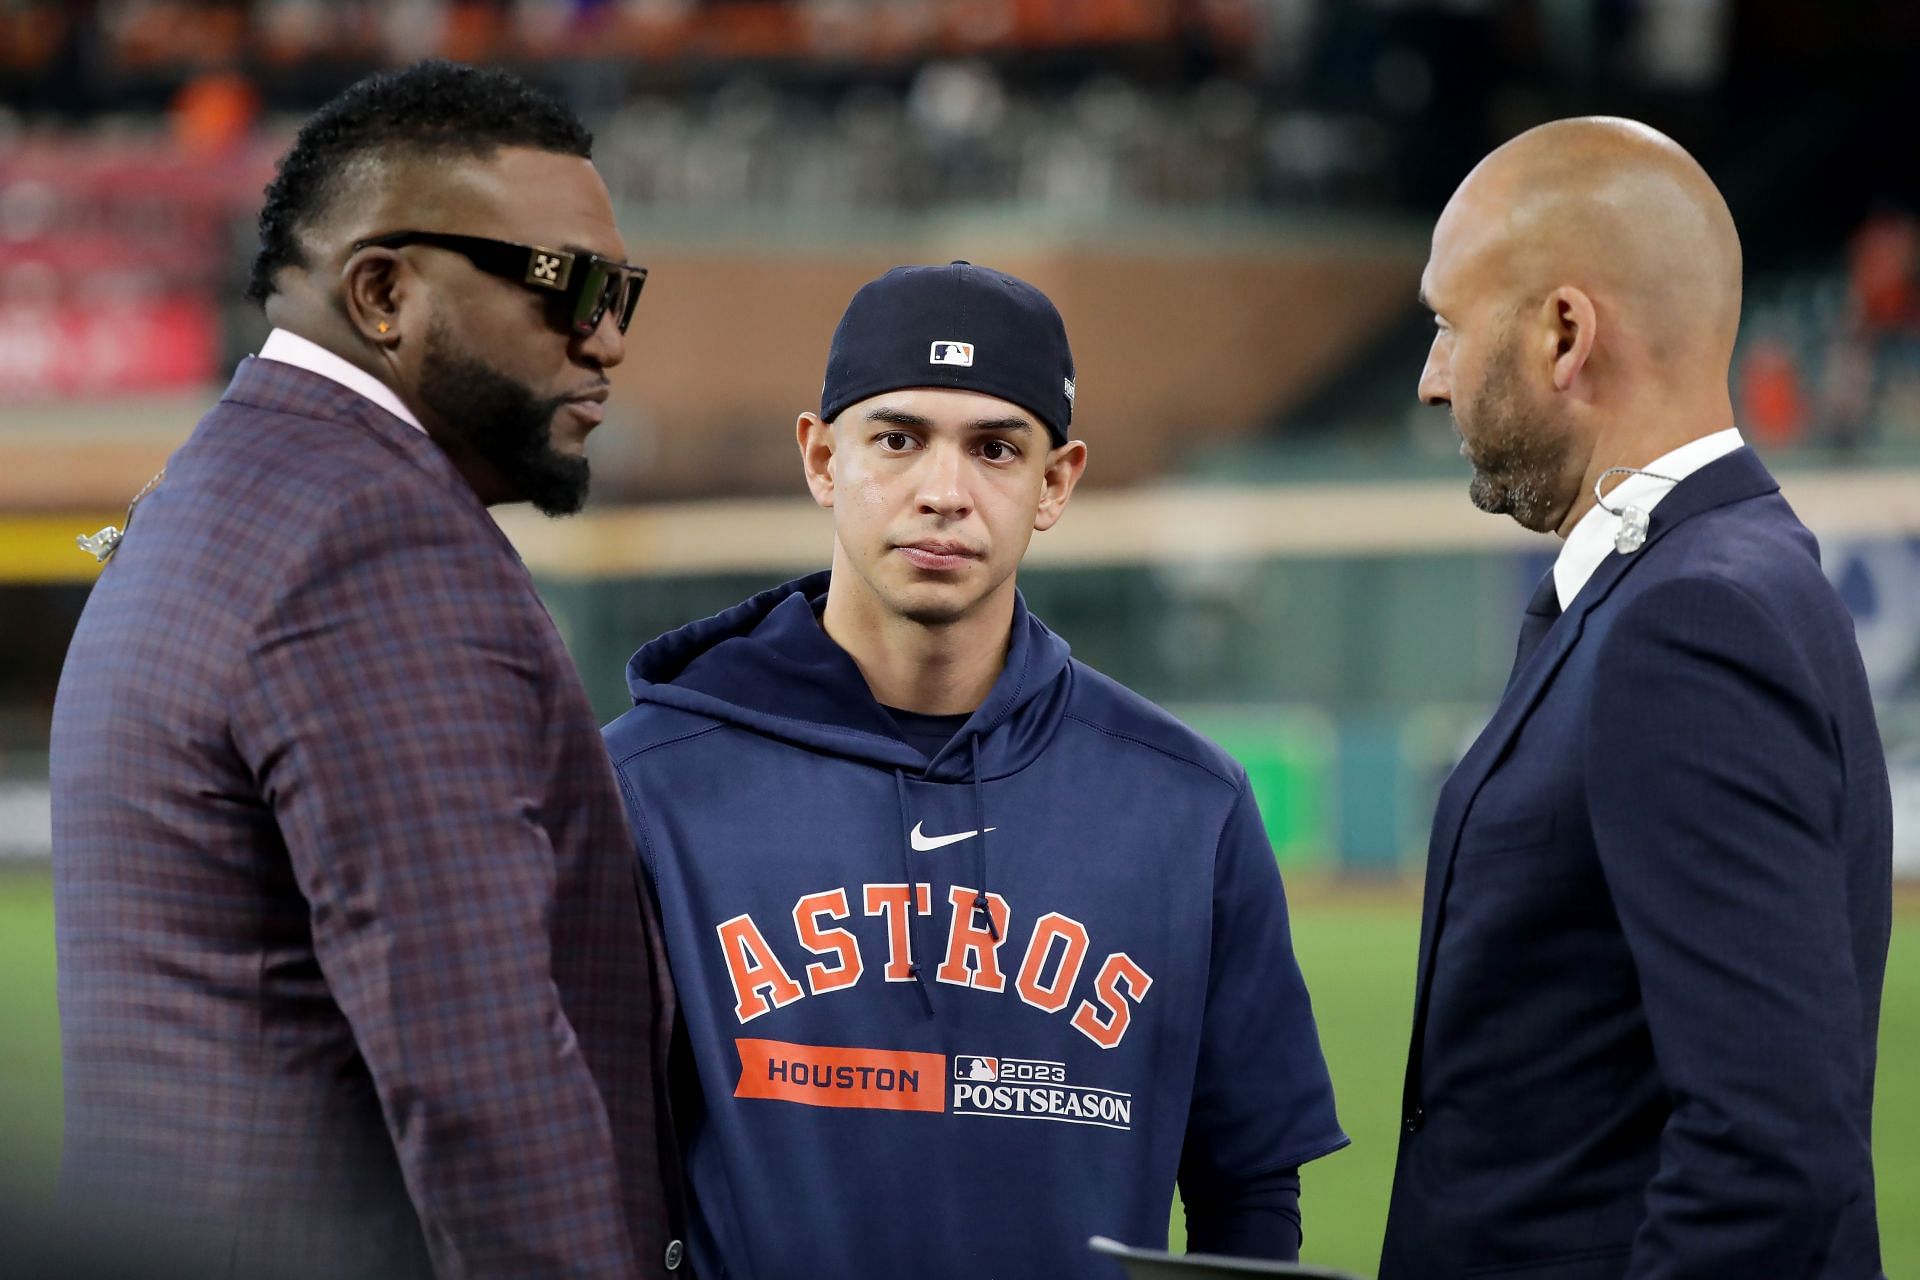 Derek Jeter and David Ortiz seem to have found chemistry on set, creating an engaging dynamic for viewers.